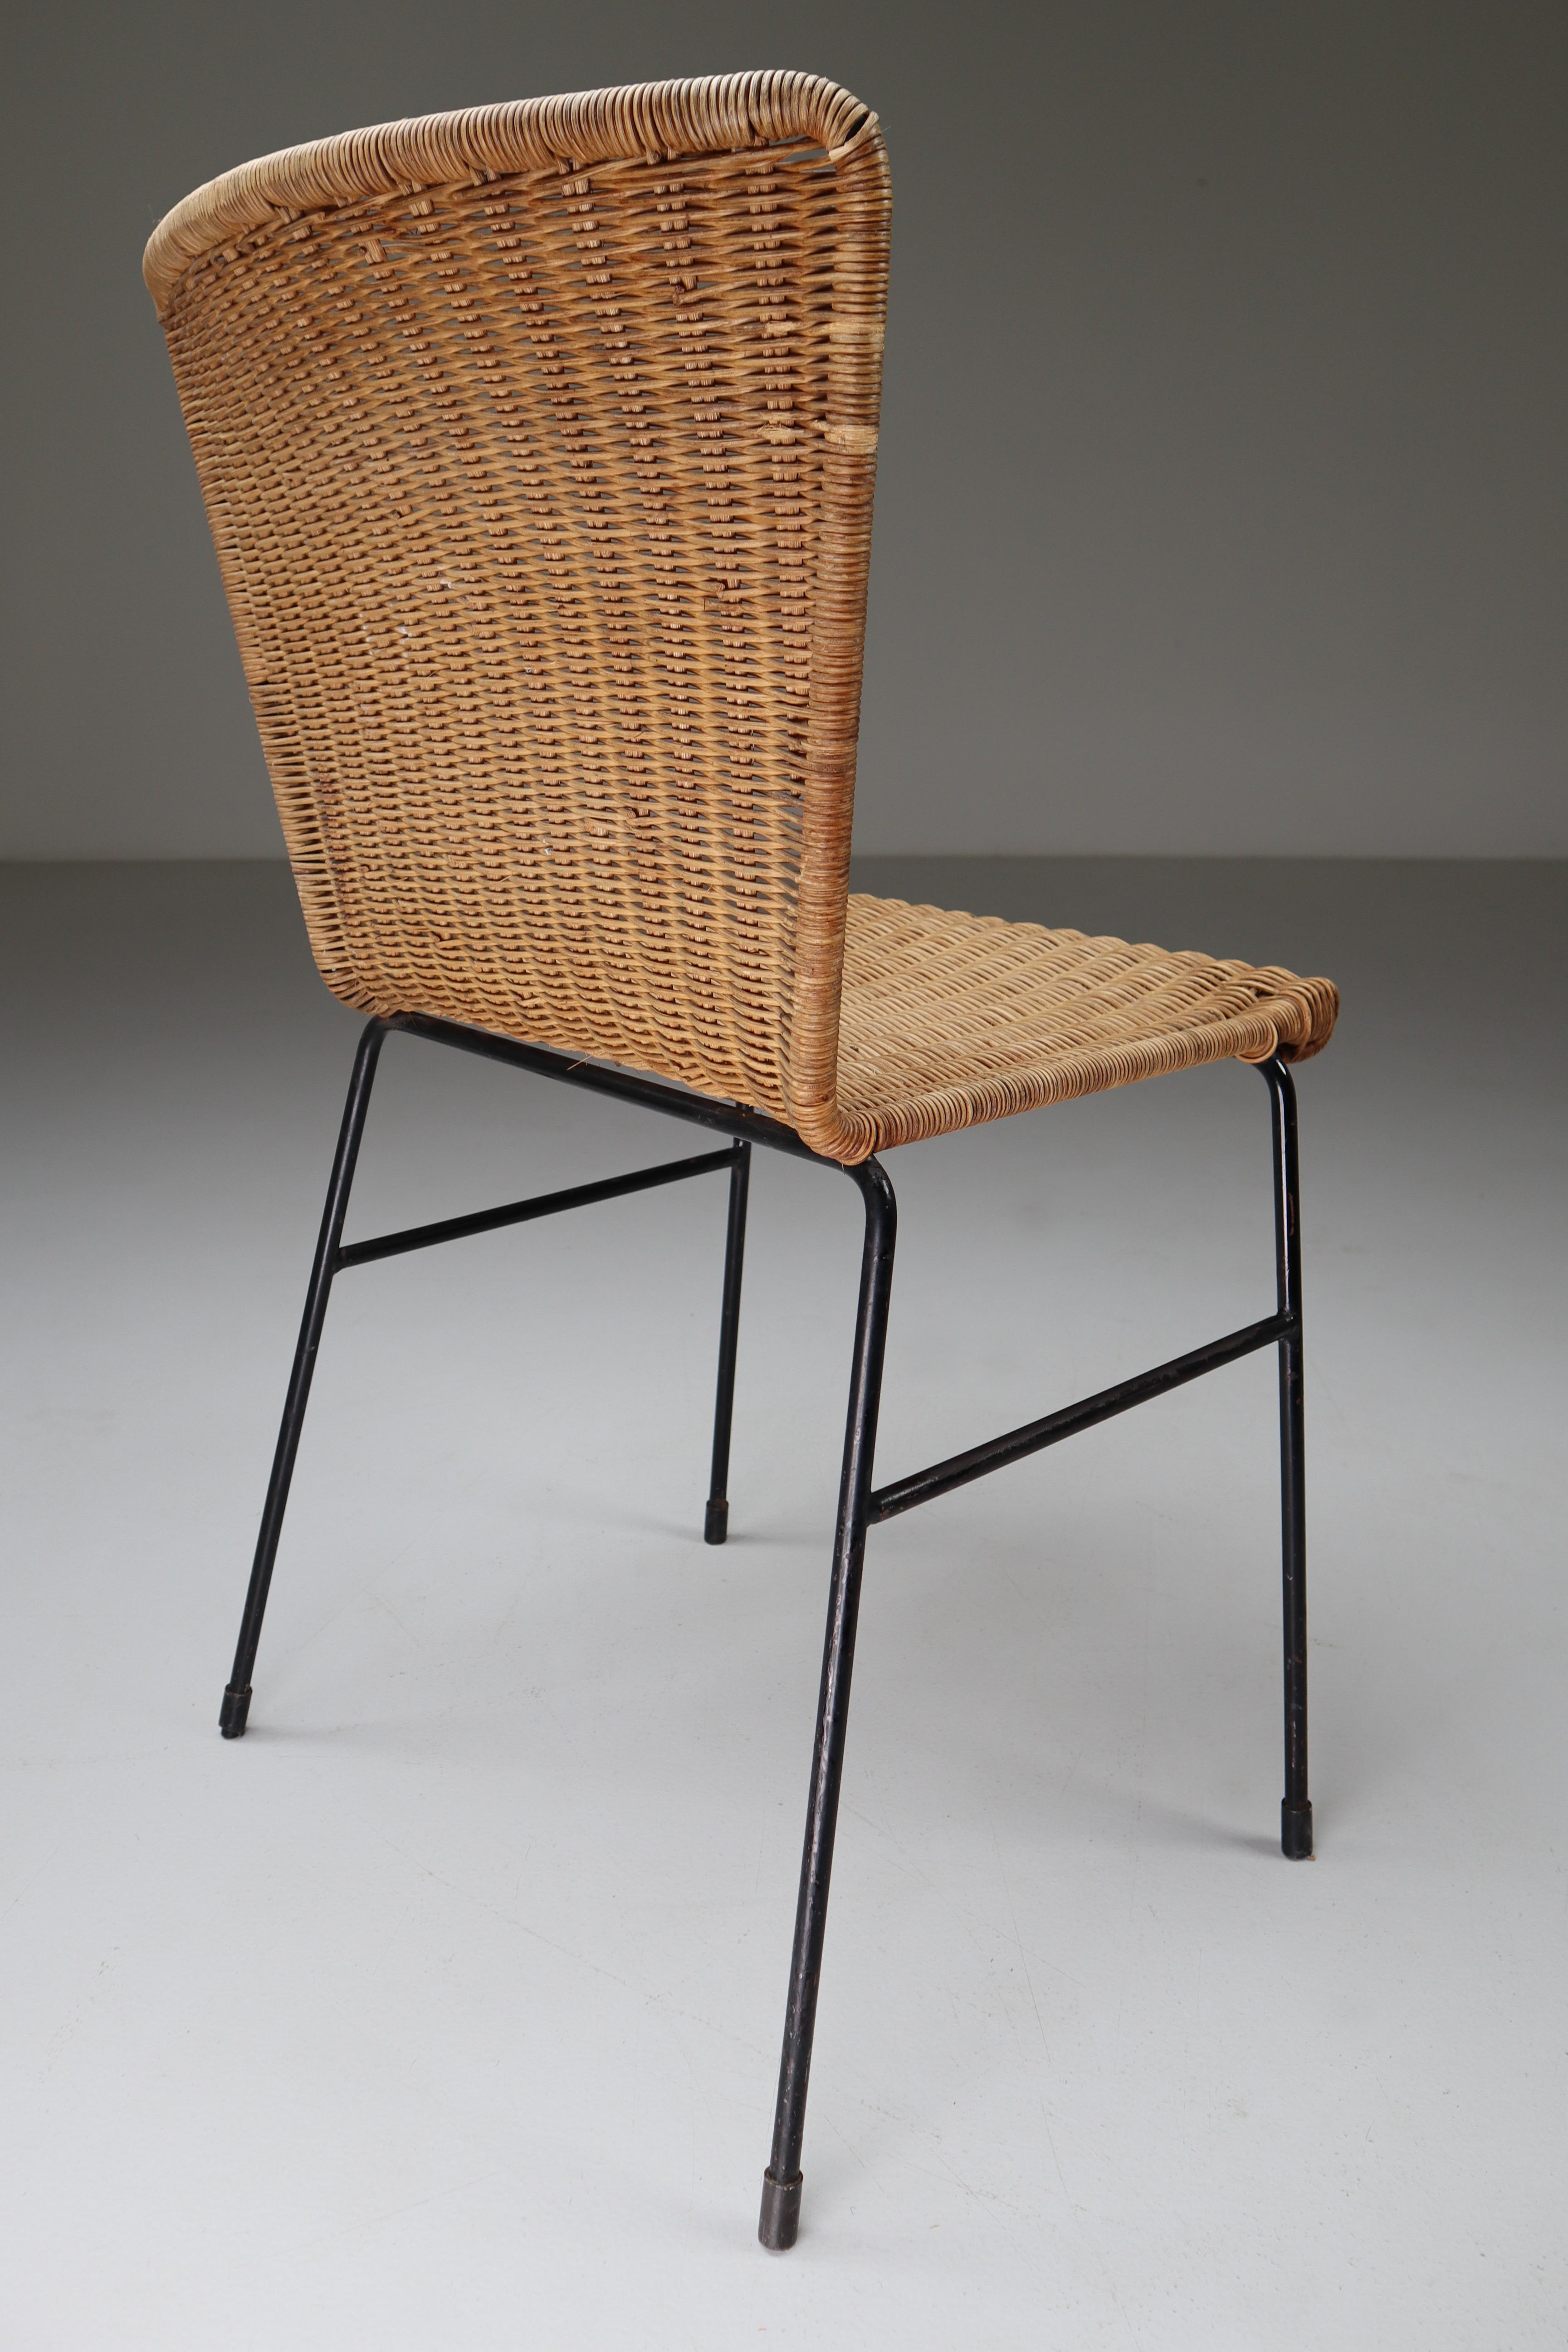 Dutch Patinated Metal Framed chairs with Woven Wicker Seat, The Netherlands, 1950